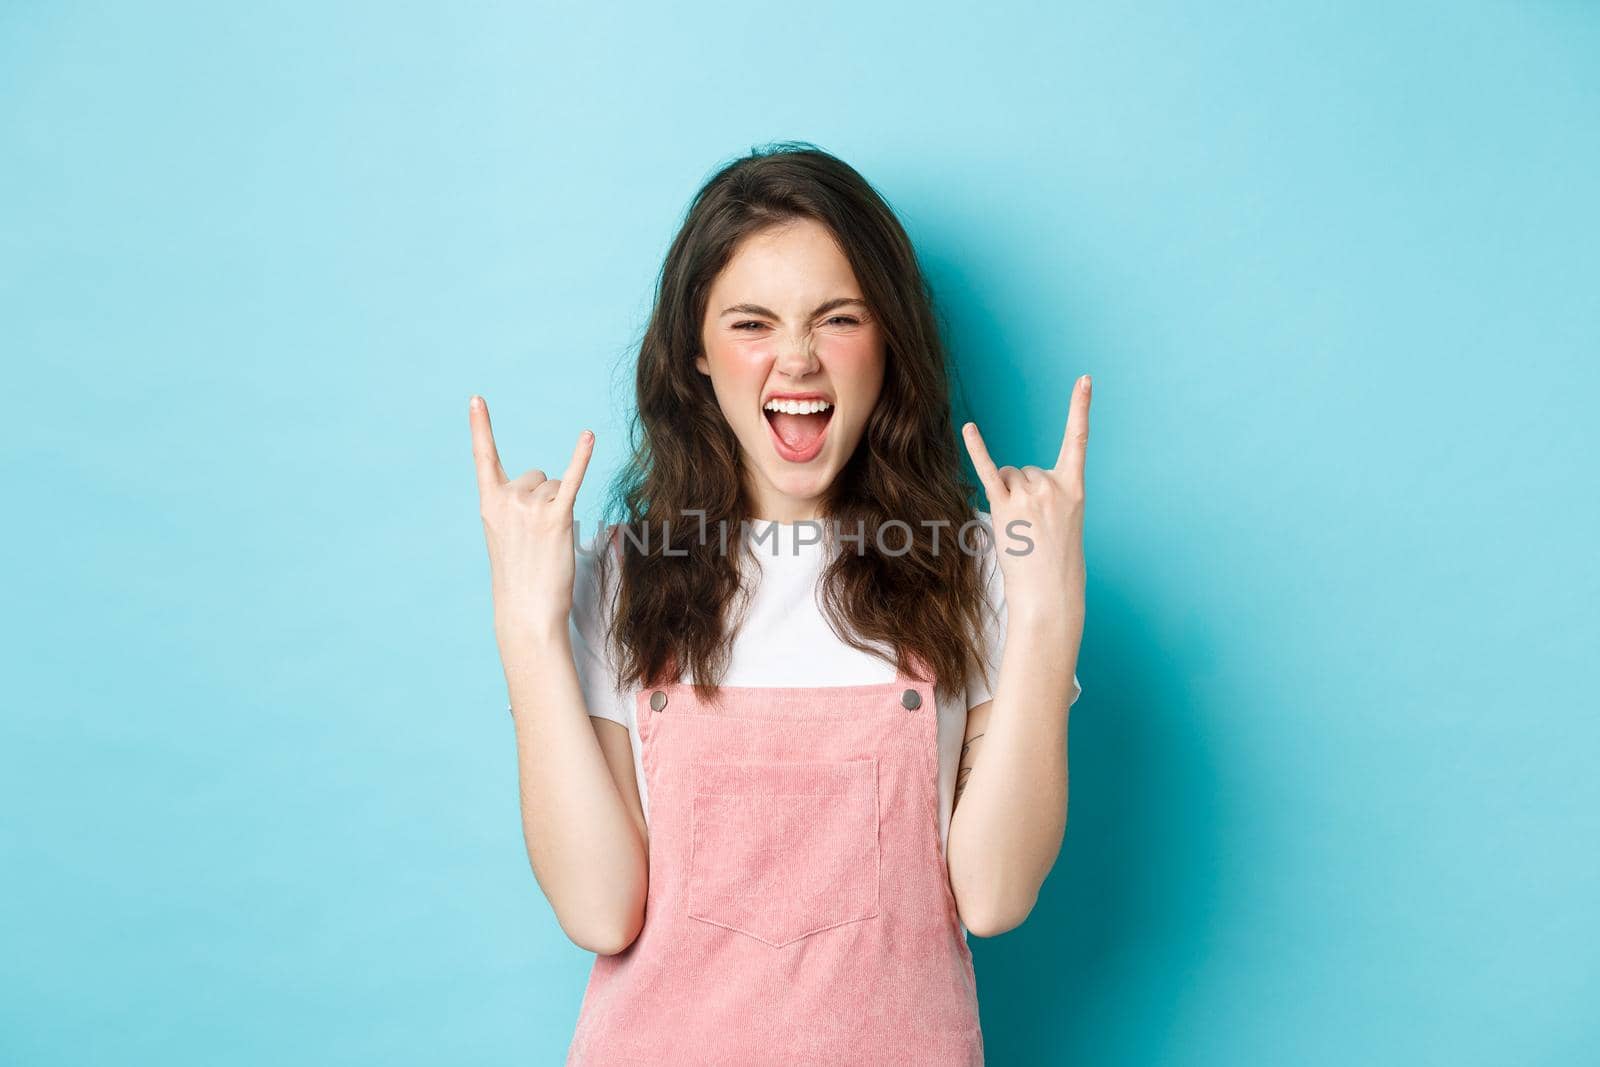 Portrait of excited woman enjoying concert or awesome event, showing rock n roll horns gesture and shouting with joy, having fun, standing over blue background.